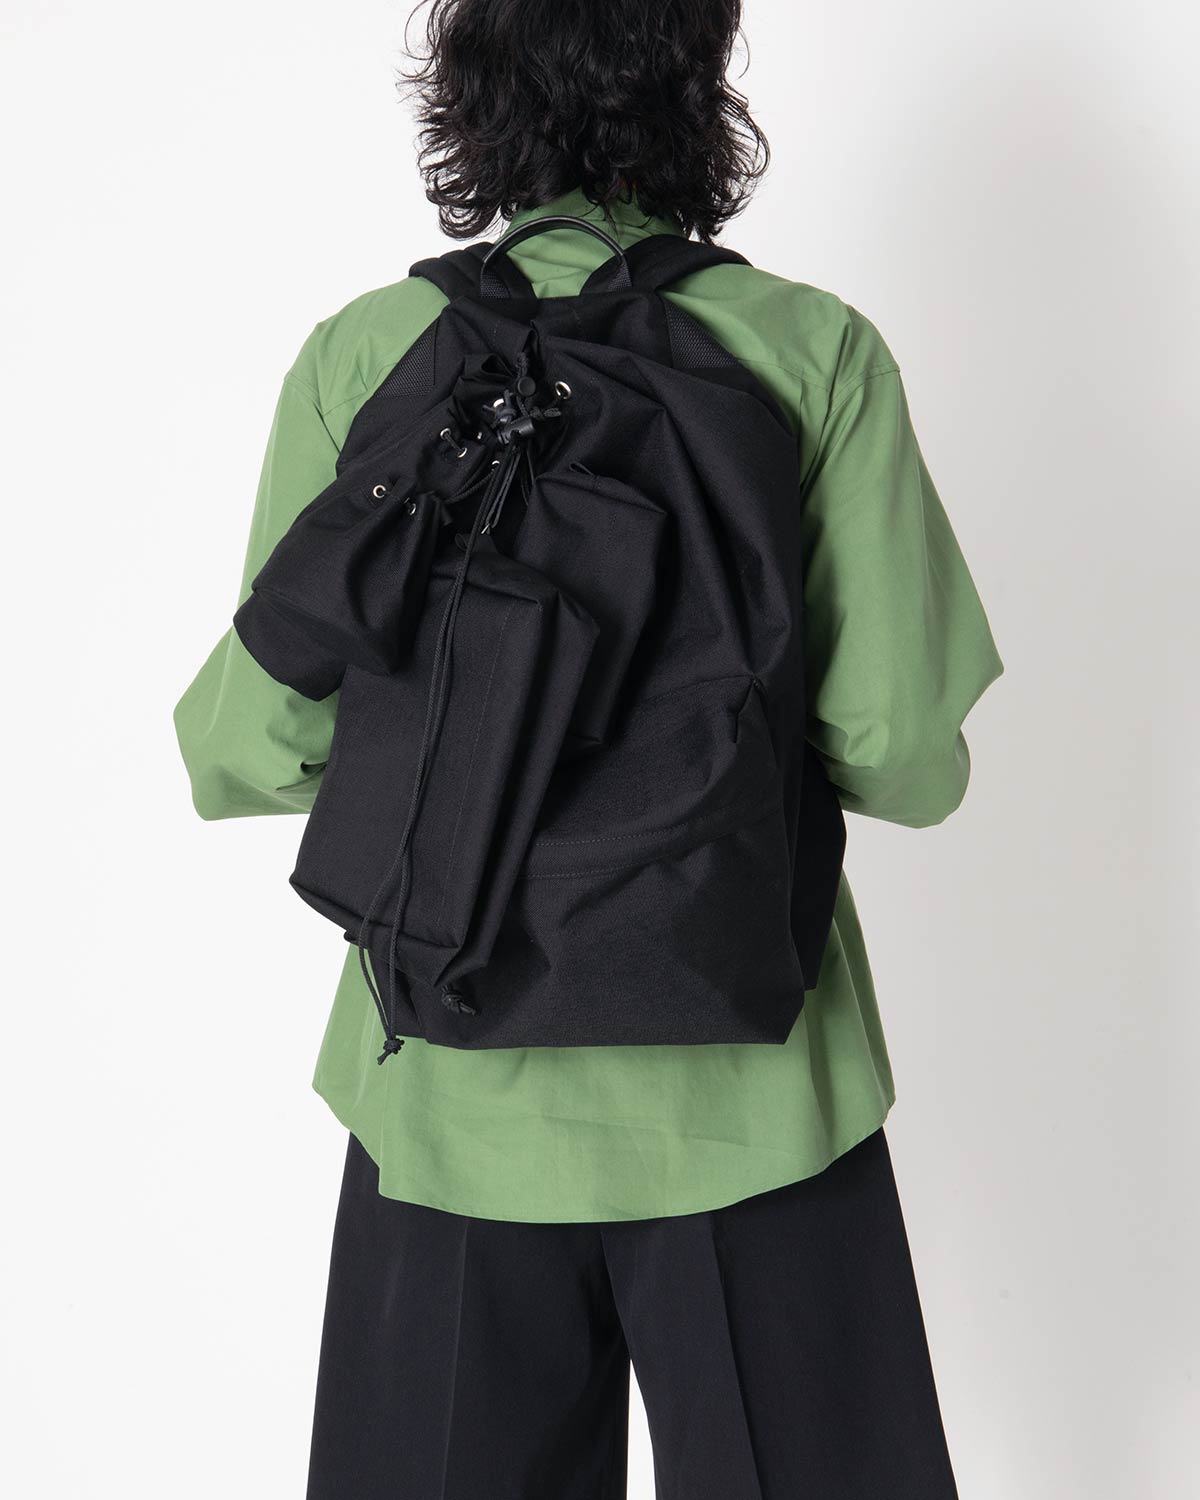 LARGE BACKPACK SET MADE BY AETA